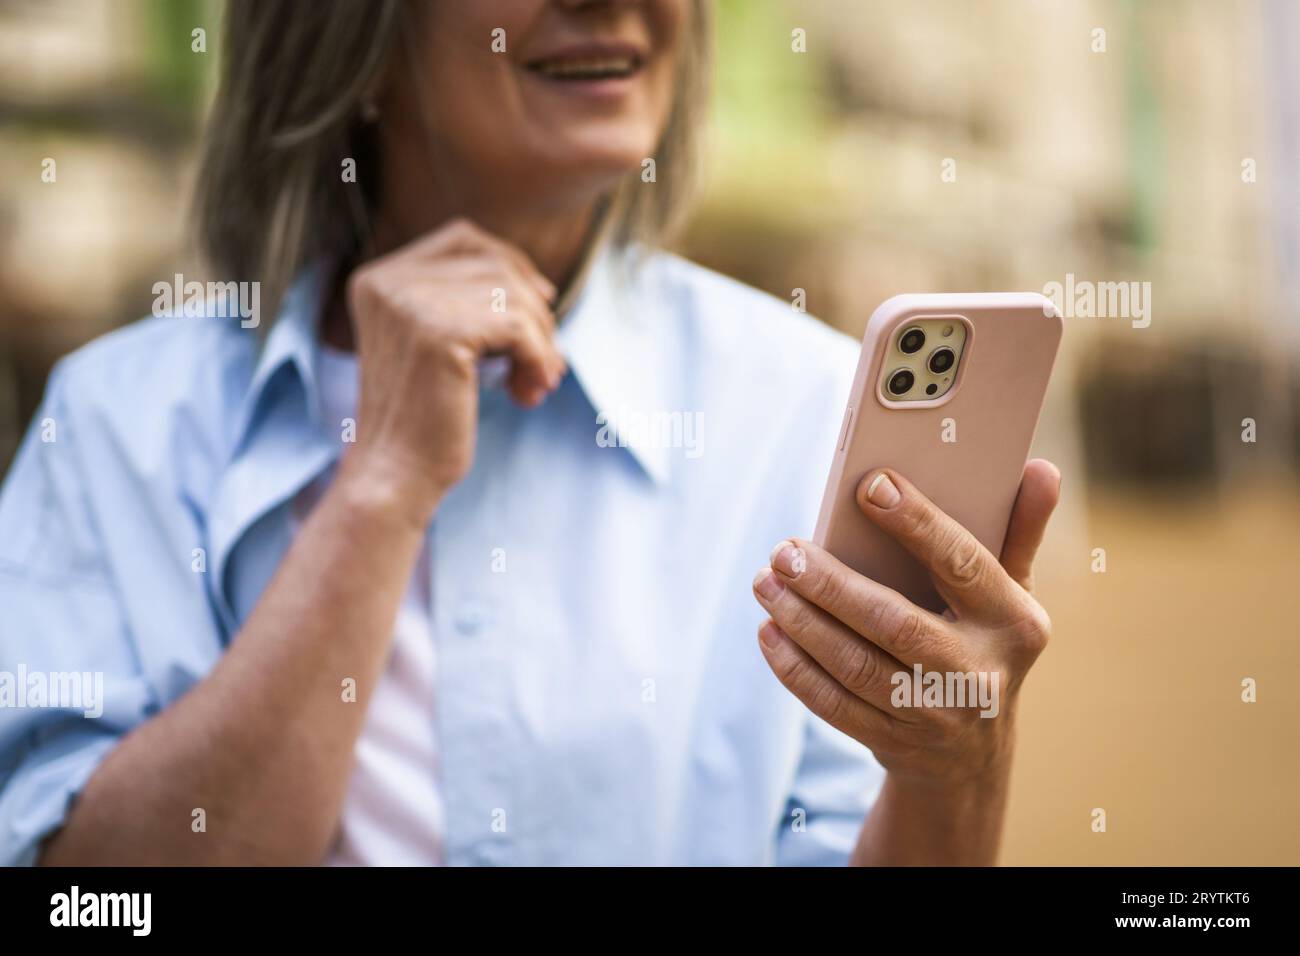 Hands of a senior woman holding a mobile phone, emphasizing the concept of communication in old age. The image showcases the wom Stock Photo